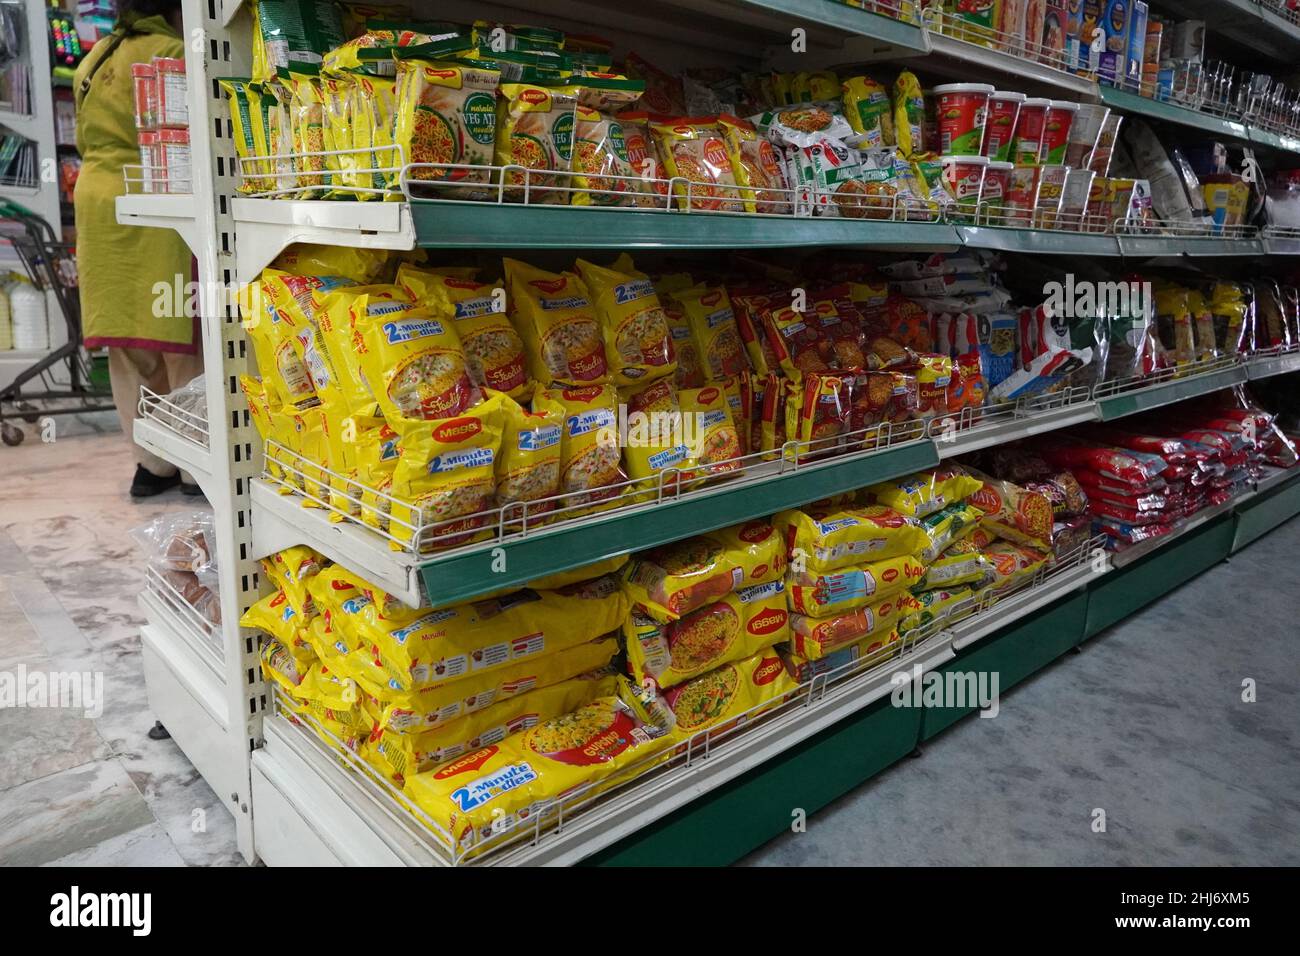 https://c8.alamy.com/comp/2HJ6XM5/several-packets-of-packaged-noodles-kept-on-shelf-for-sale-maggi-instant-noodles-on-display-at-supermarket-shelf-mumbai-india-march-2021-hdy-2HJ6XM5.jpg